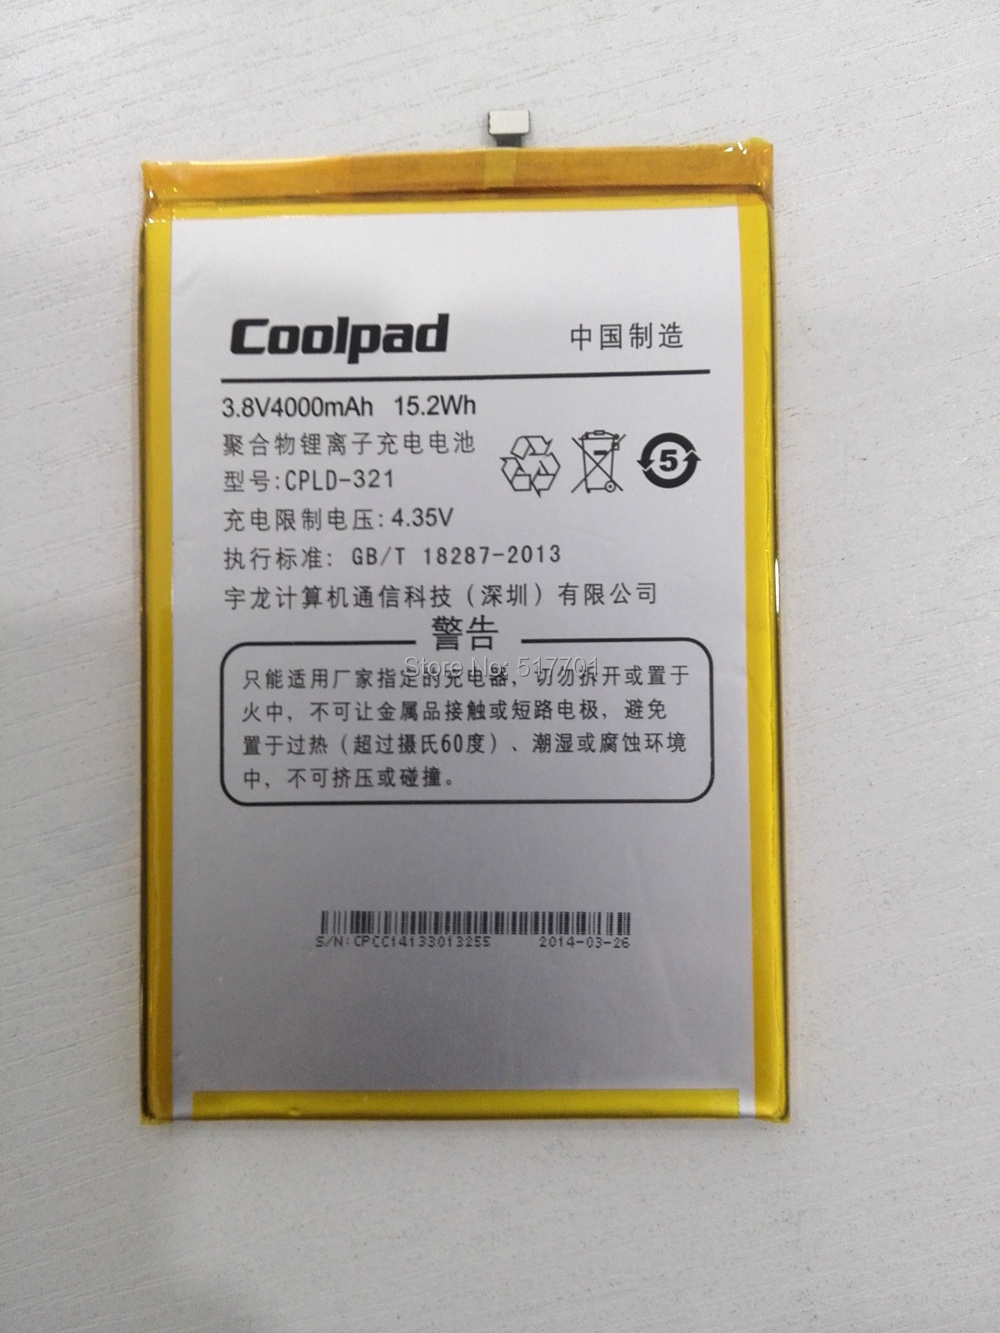    CPLD-321  Coolpad 9976A 9976   